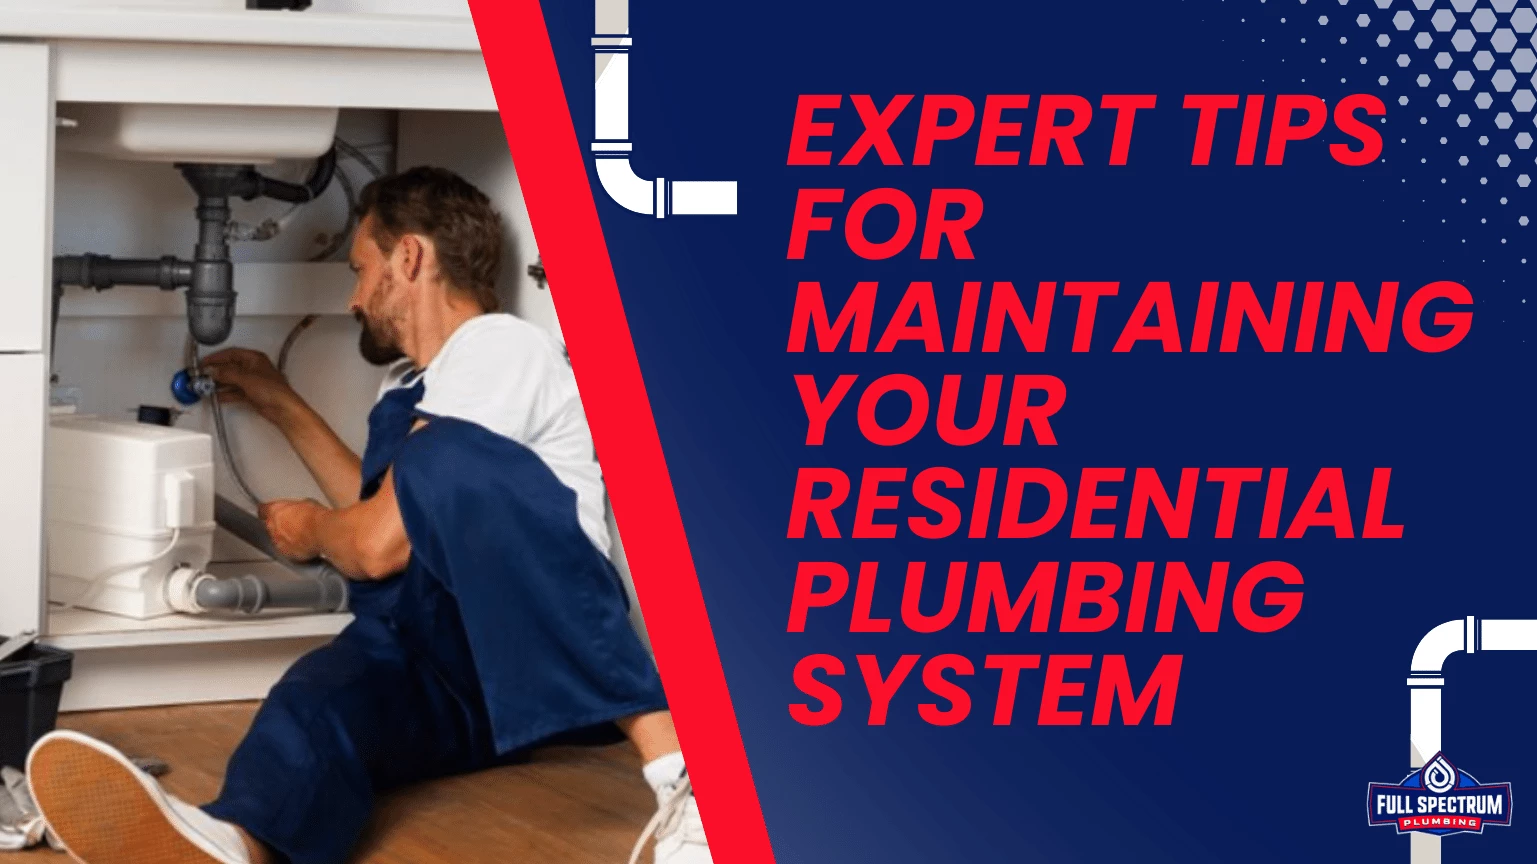 Expert Tips for Maintaining Your Residential Plumbing System